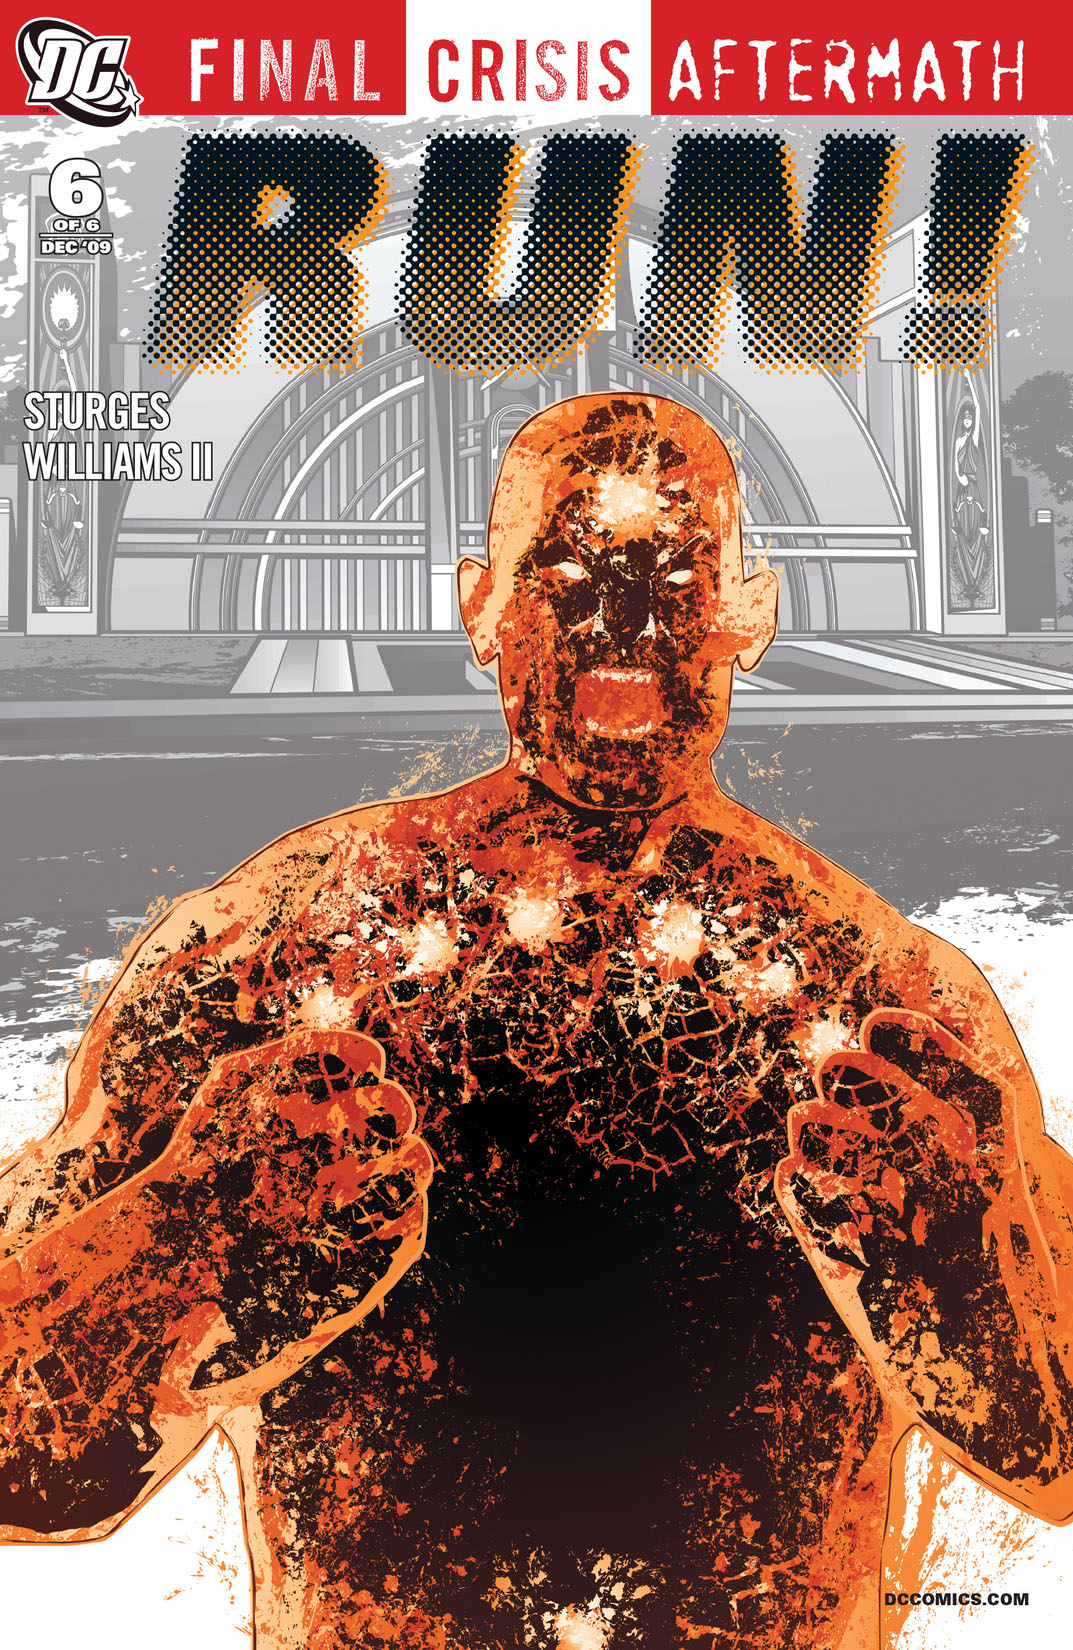 Final Crisis Aftermath: RUN! #6 preview images